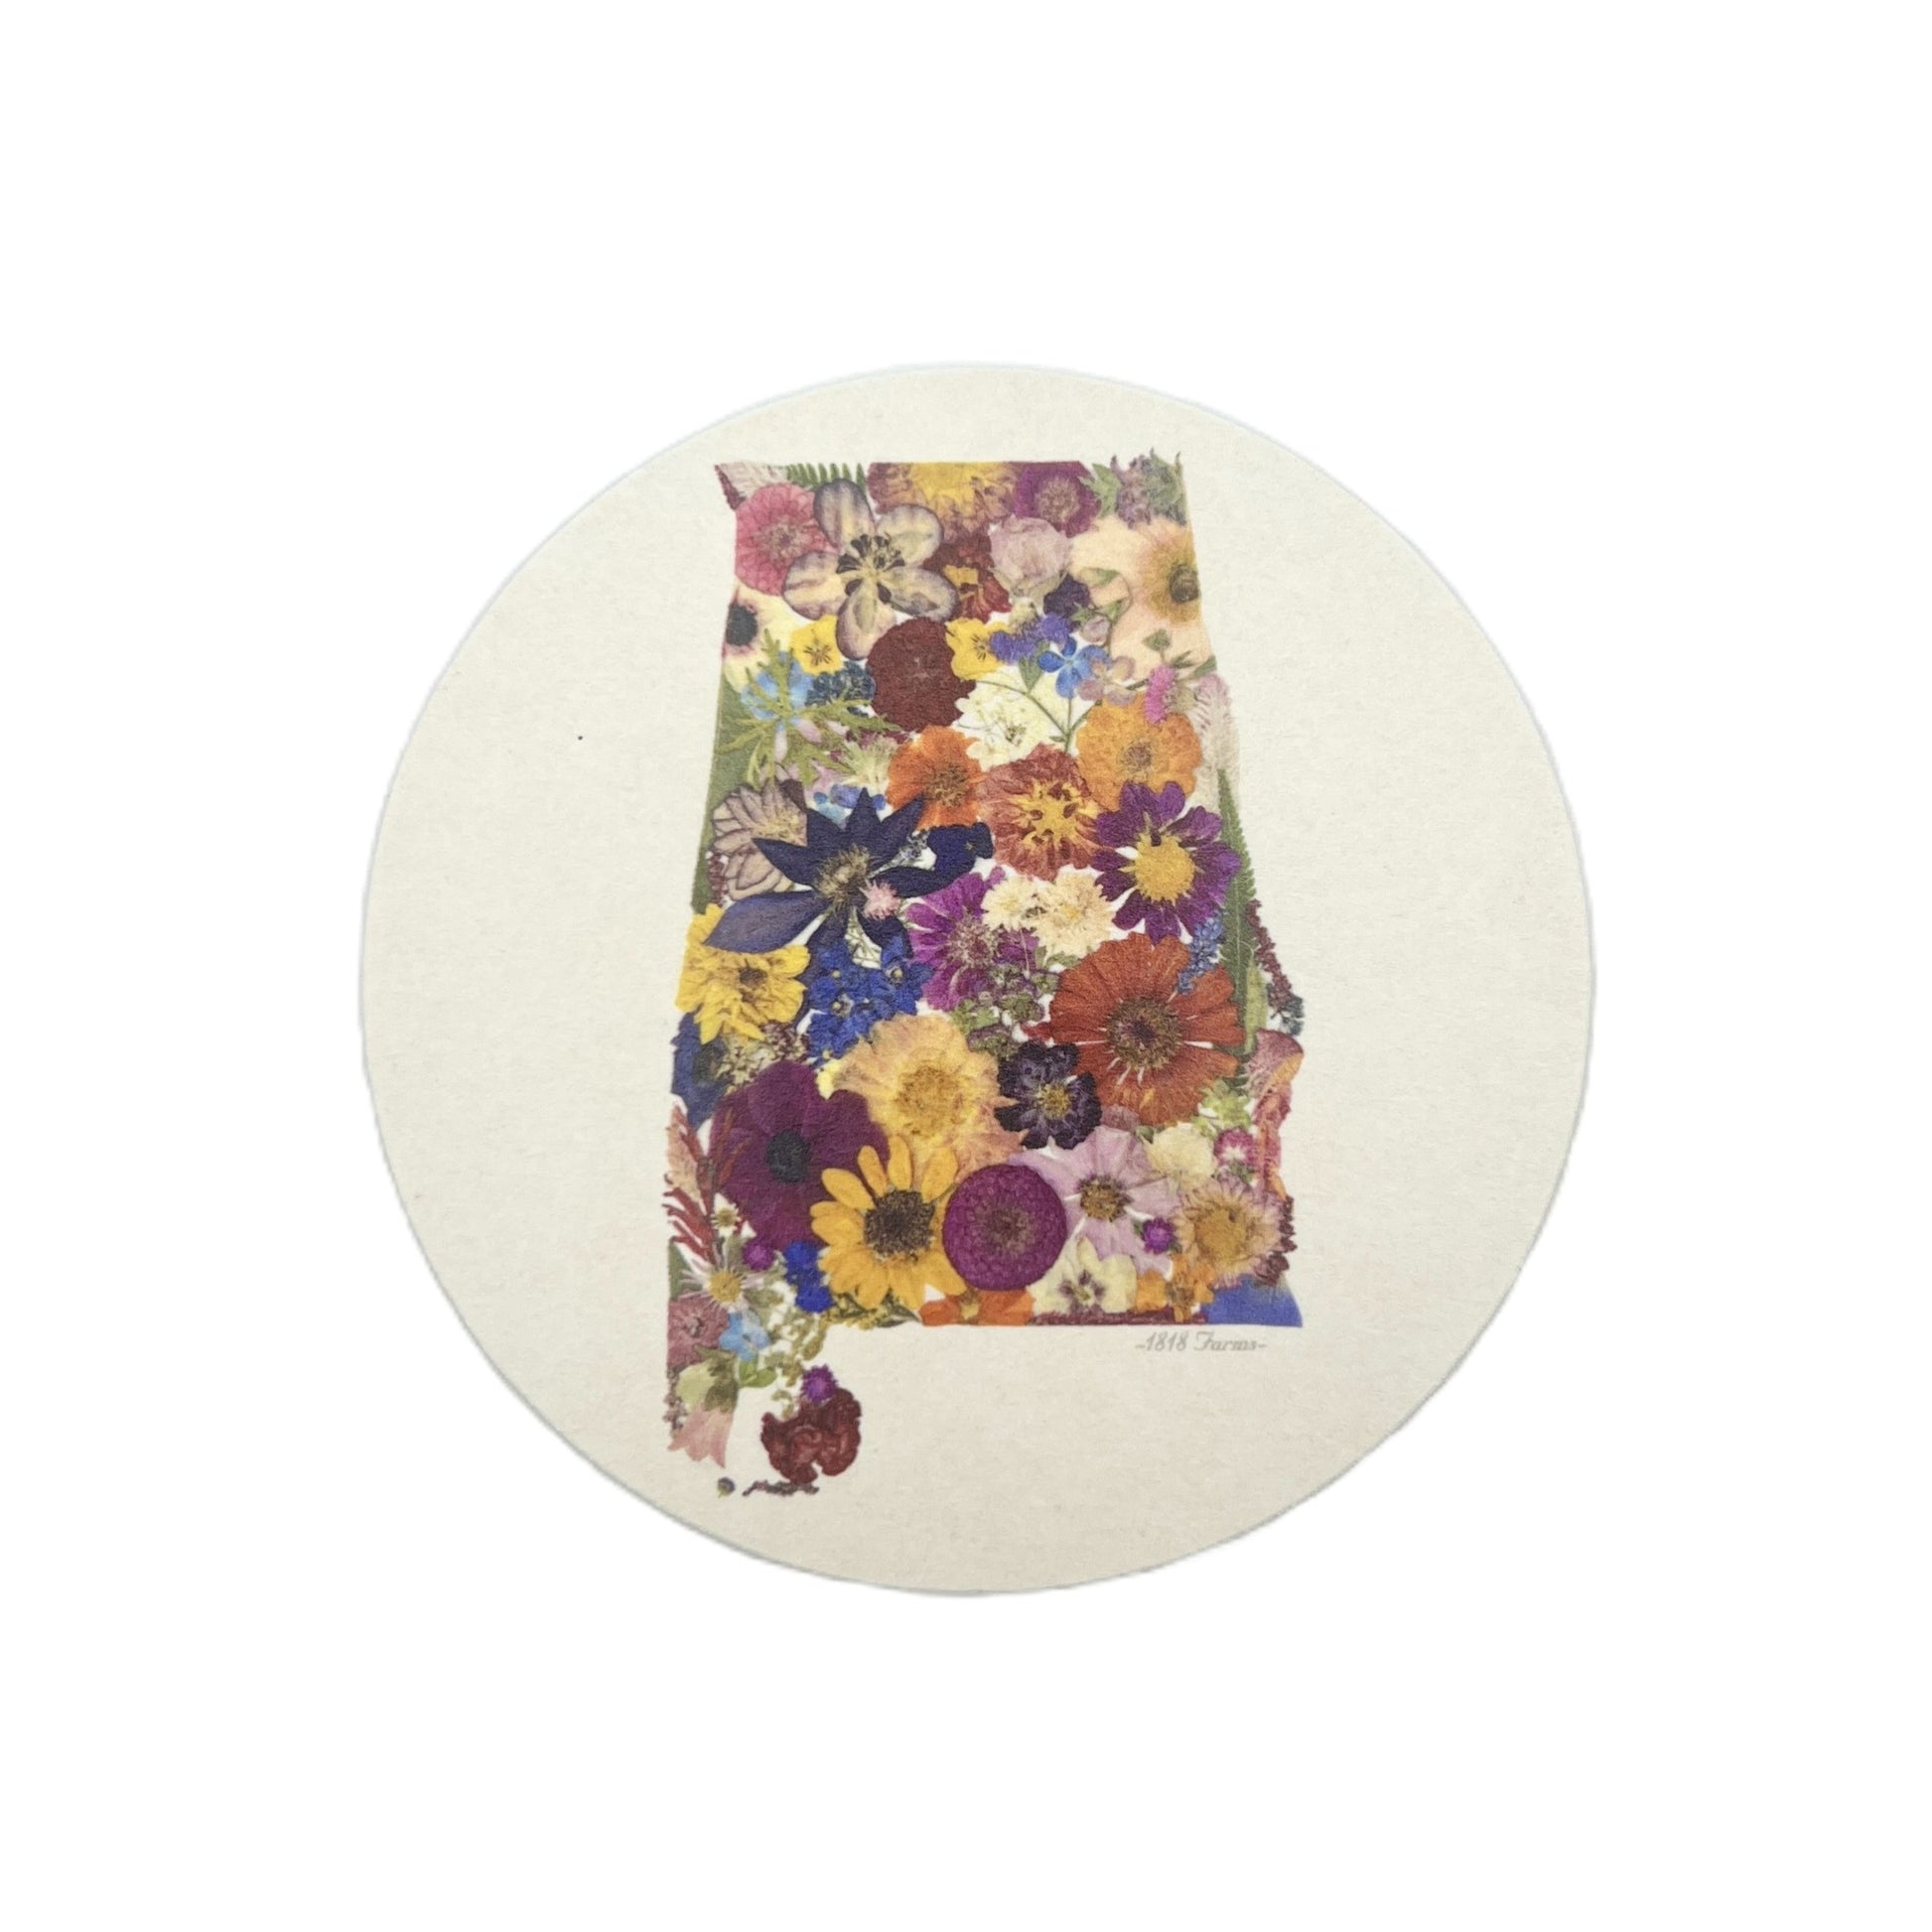 State Themed Drink Coasters (Set of 6)  - "Where I Bloom" Collection Coaster 1818 Farms Alabama  